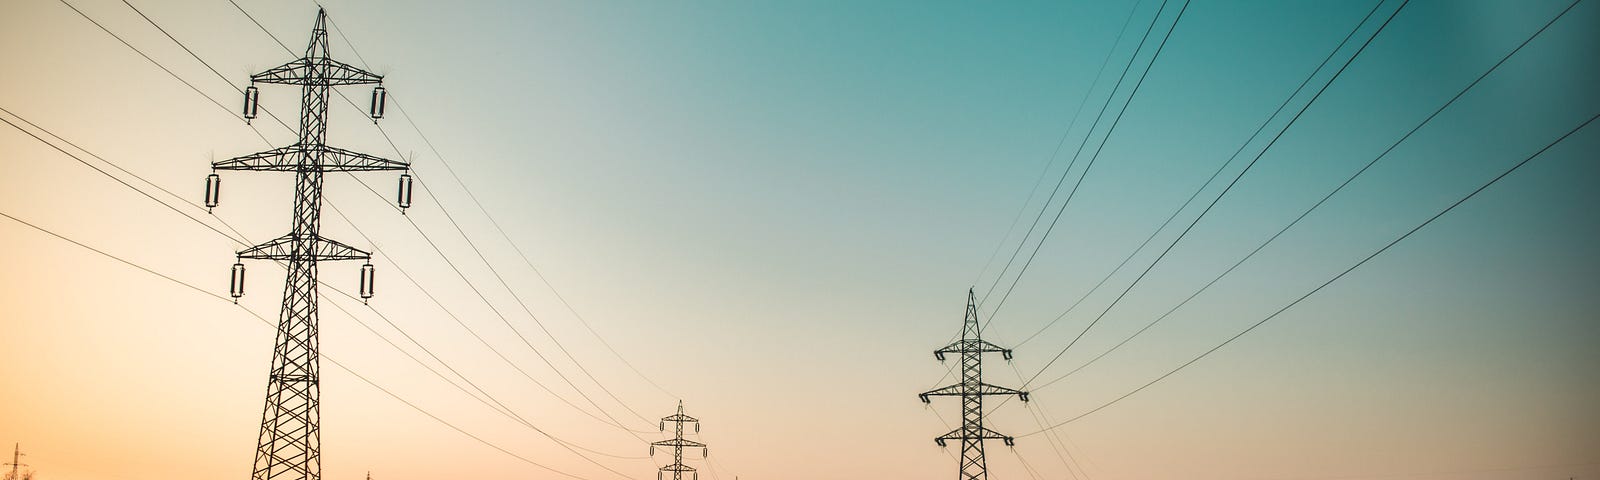 Transmission lines run along towers over a grassy field.